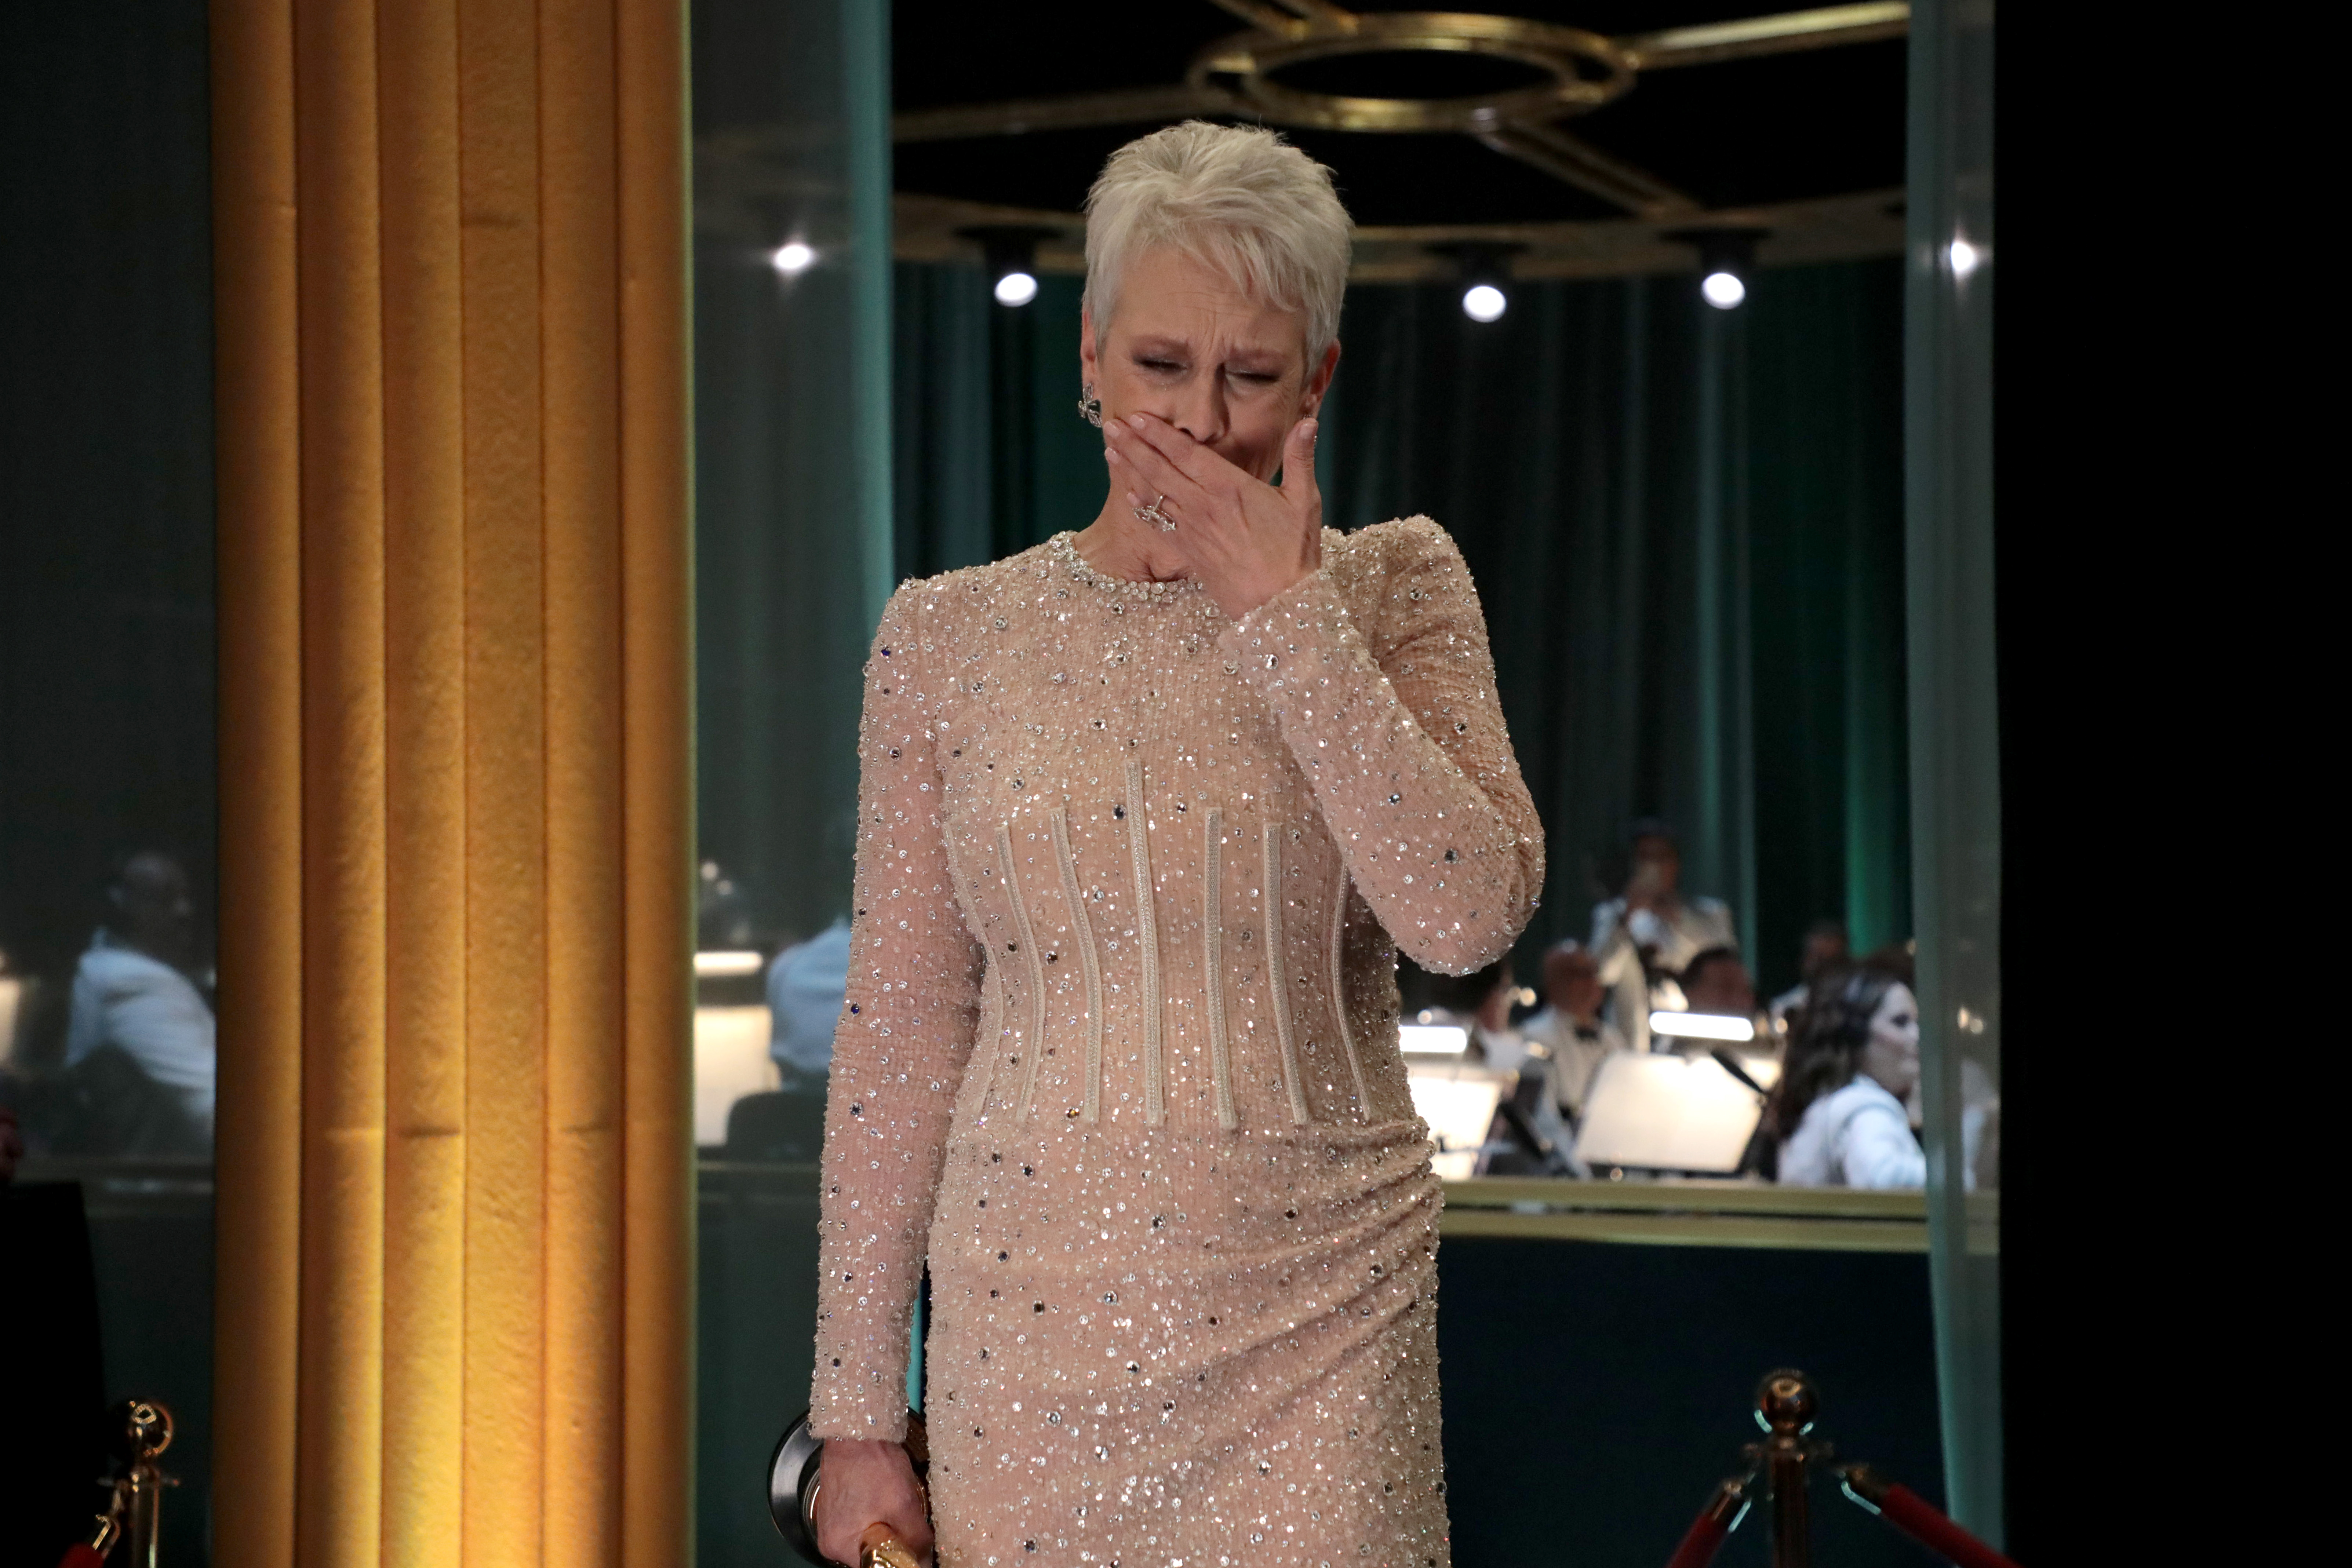 Best Actress in a Supporting Role winner for "Everything Everywhere All at Once," Jamie Lee Curtis is seen backstage during the 95th Annual Academy Awards on March 12, 2023 in Hollywood, California. | Source: Getty Images